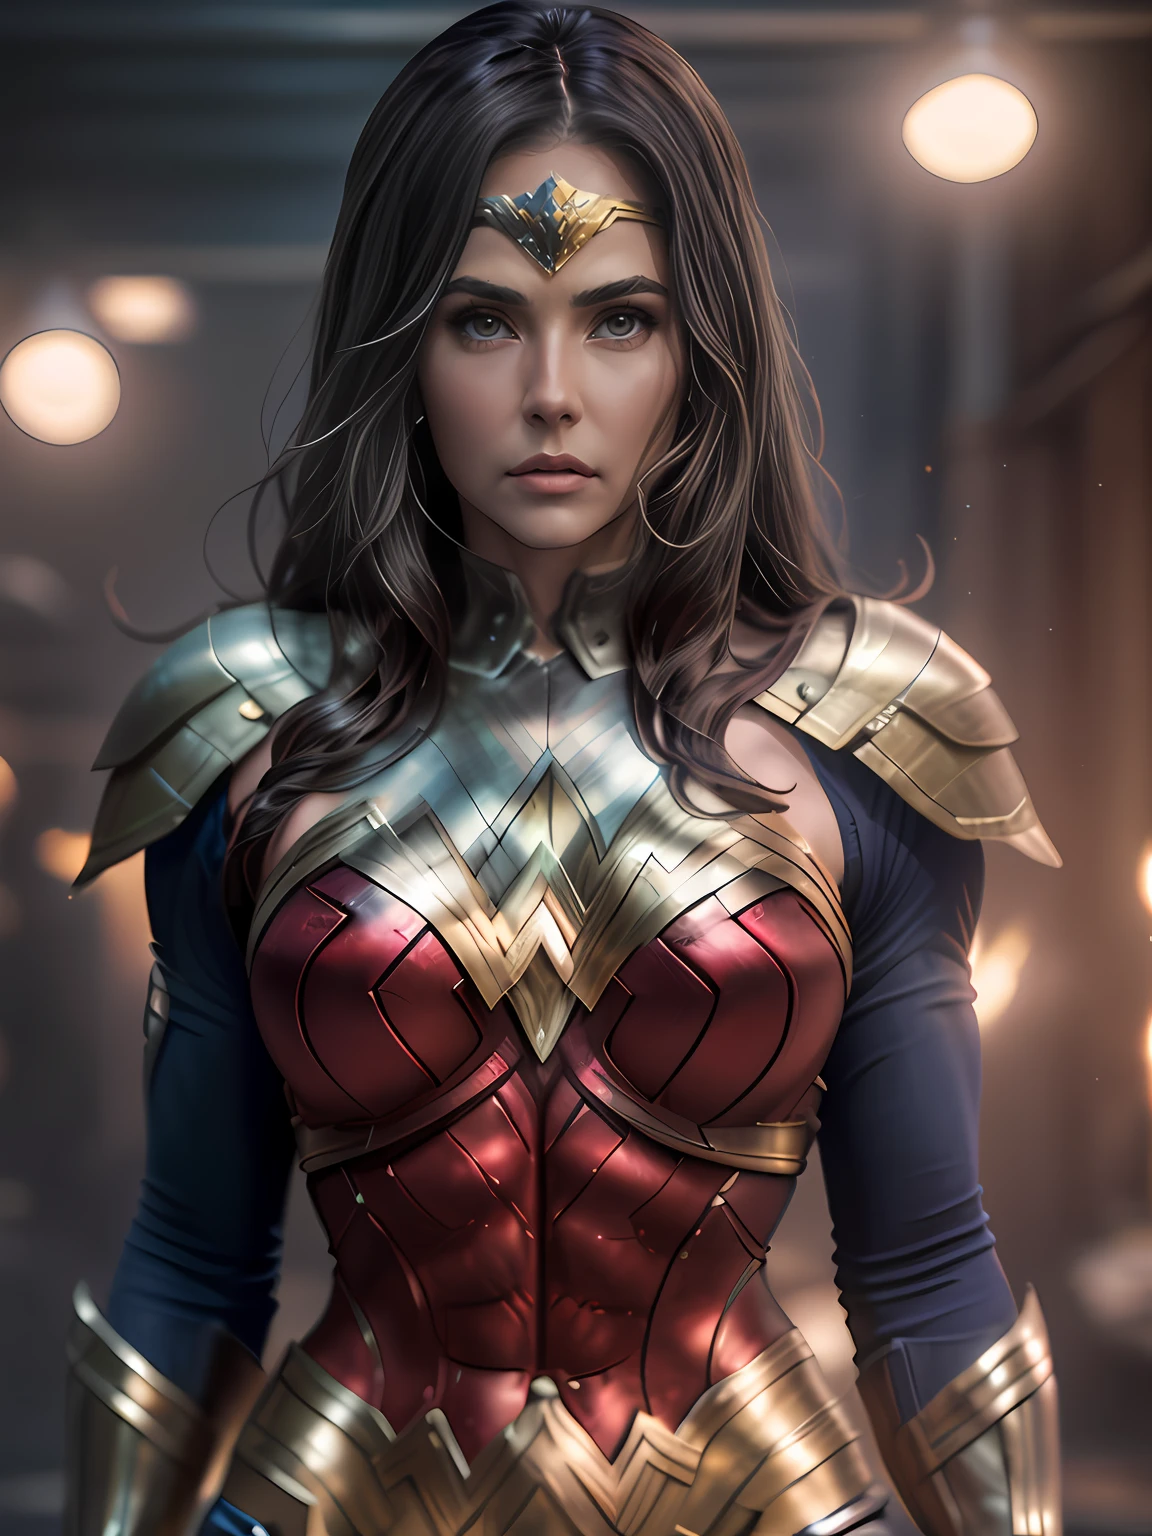 Deborah Secco as Woder Woman, Cinematic soft lighting illuminates a stunningly detailed and ultra-realistic Wonder Woman perfect body, brown eyes, red and blue armor, that is trending on ArtStation. Octane is the perfect tool to capture the softest details of this 16k photography masterpiece